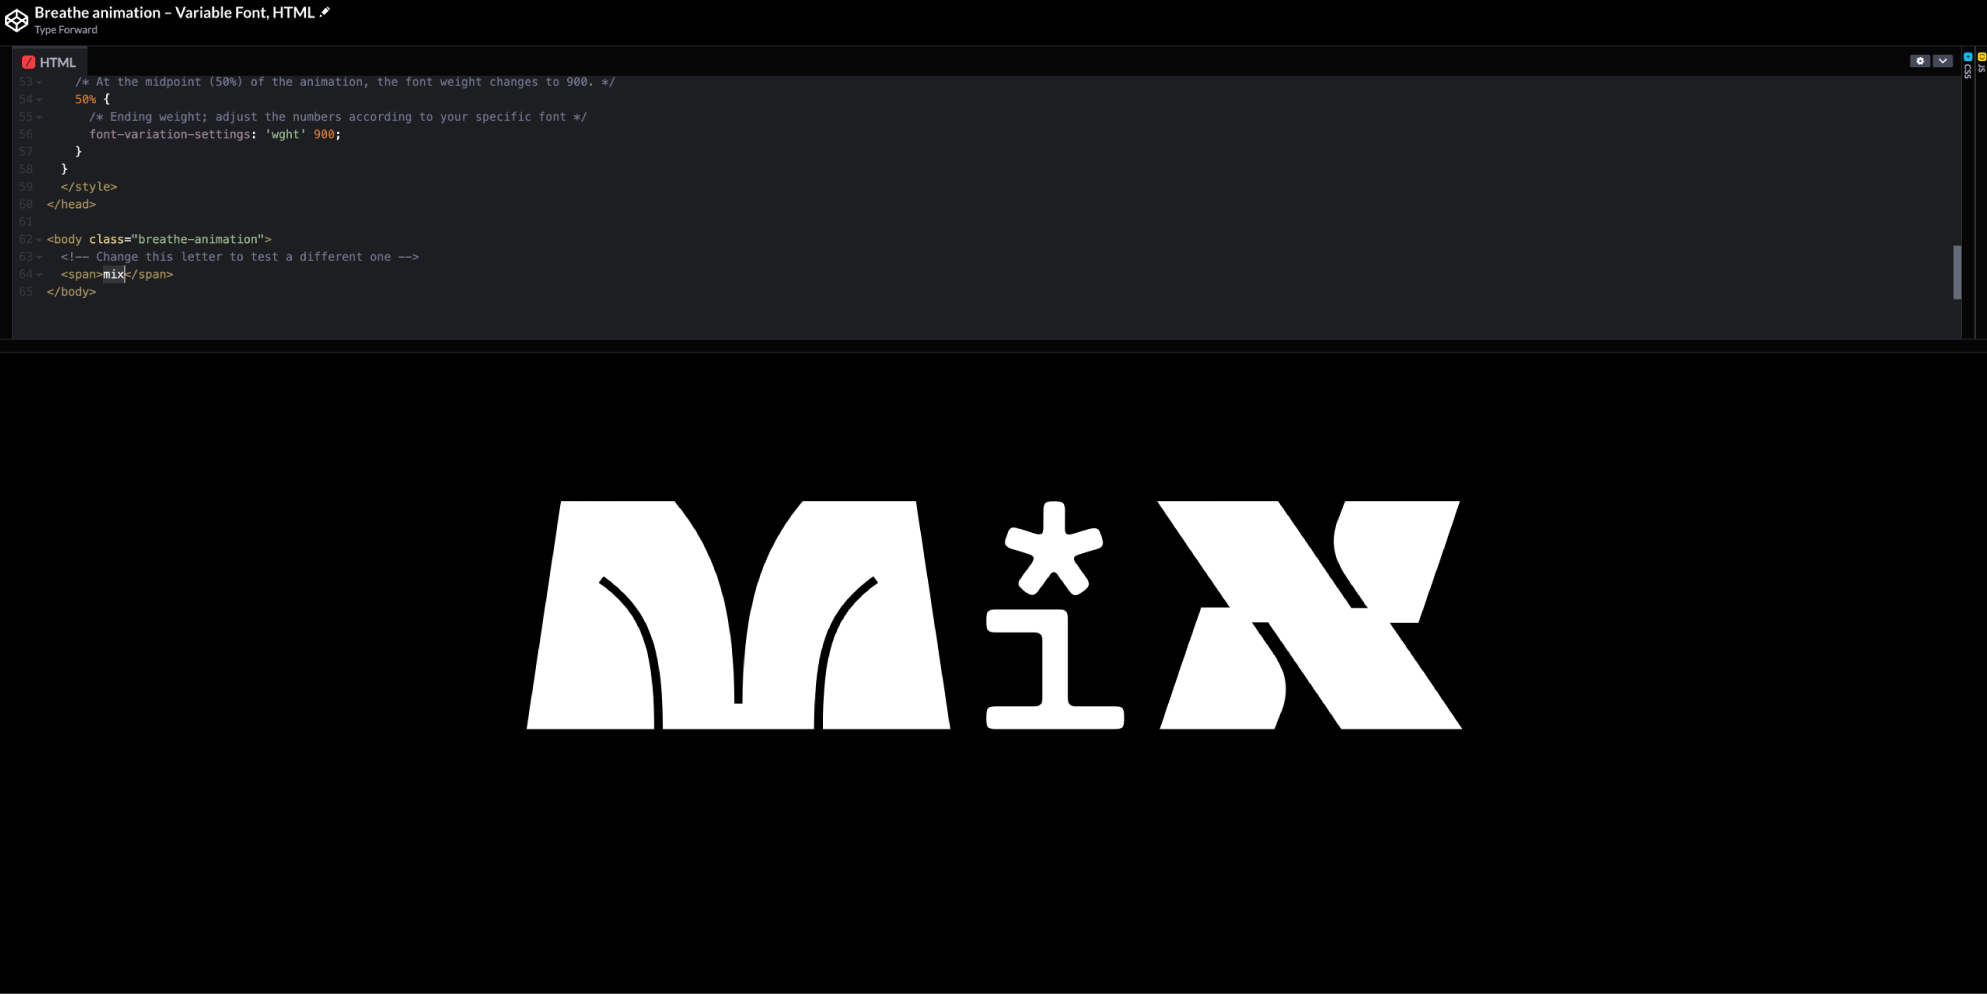 A CodePen displaying code and a variable font demonstrating the 'breathing effect', inviting viewers to explore more on the site.